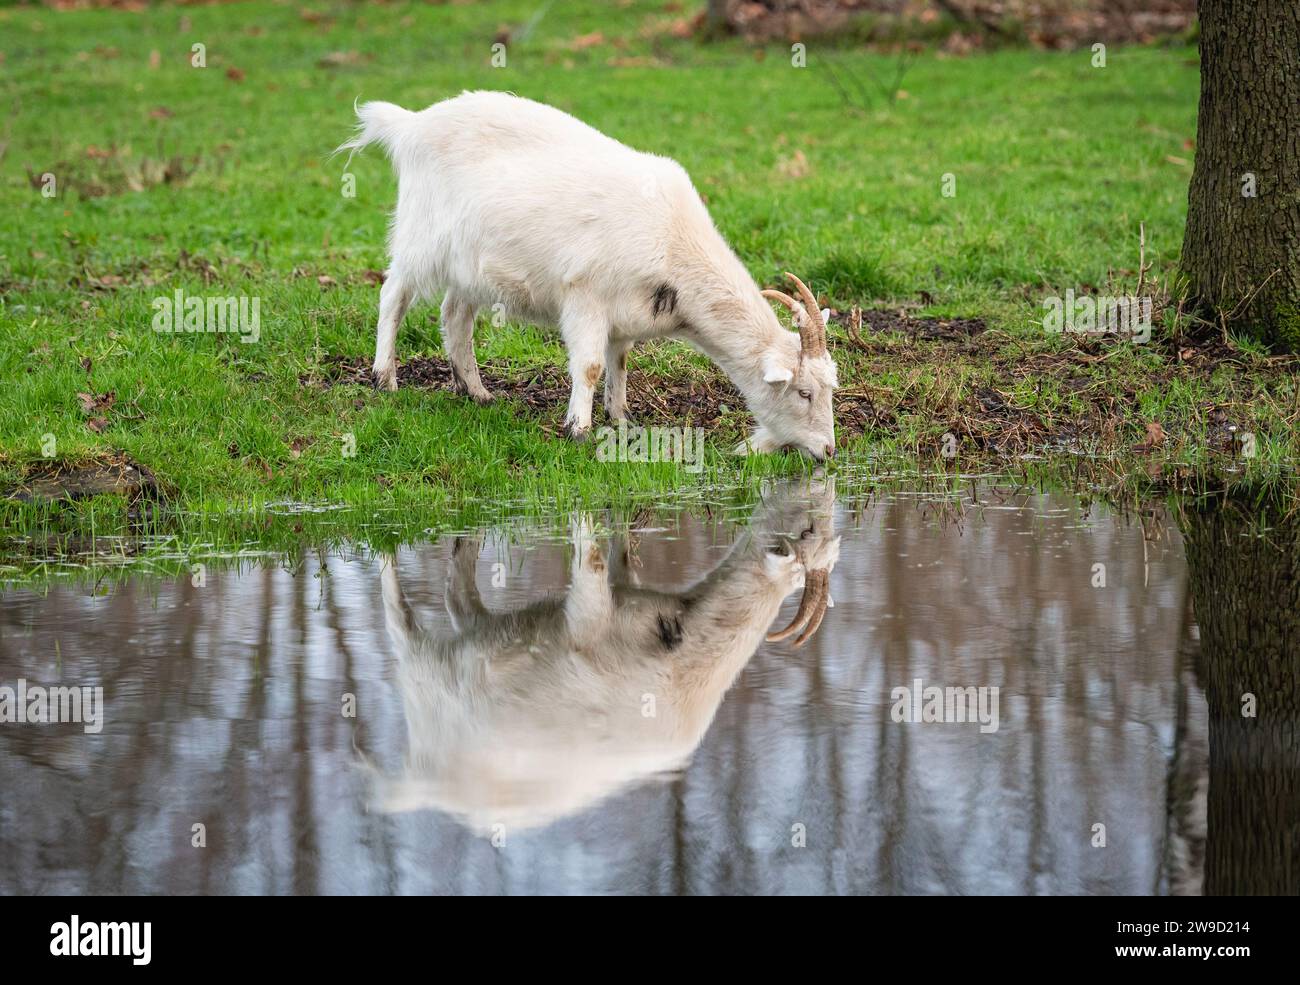 White goat reflecting in the puddle and drinking from the water. Stock Photo